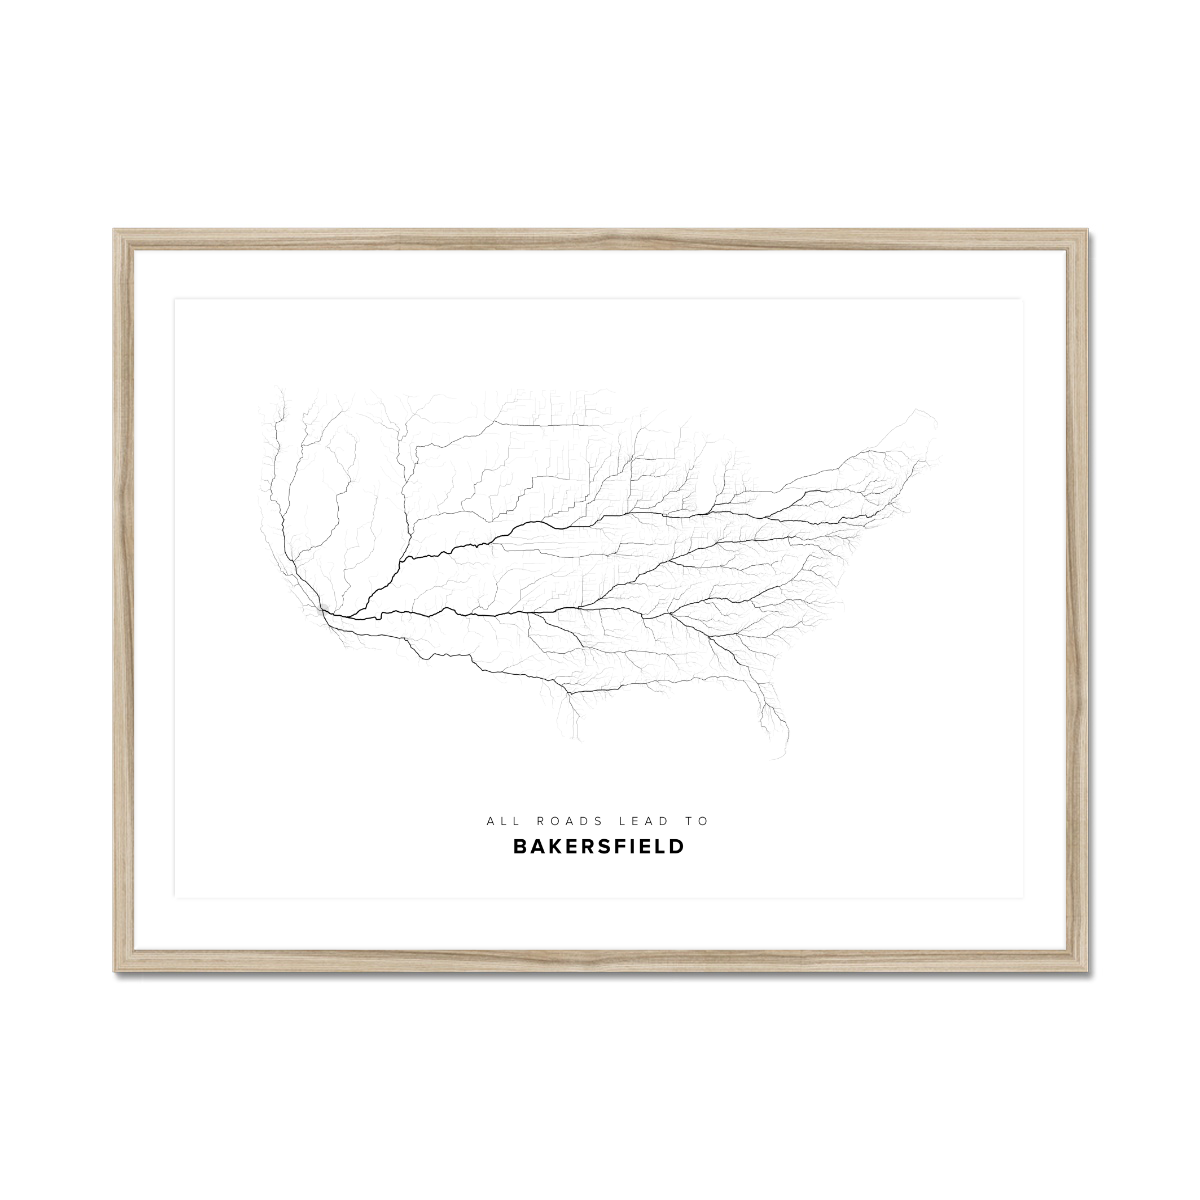 All roads lead to Bakersfield (United States of America) Fine Art Map Print